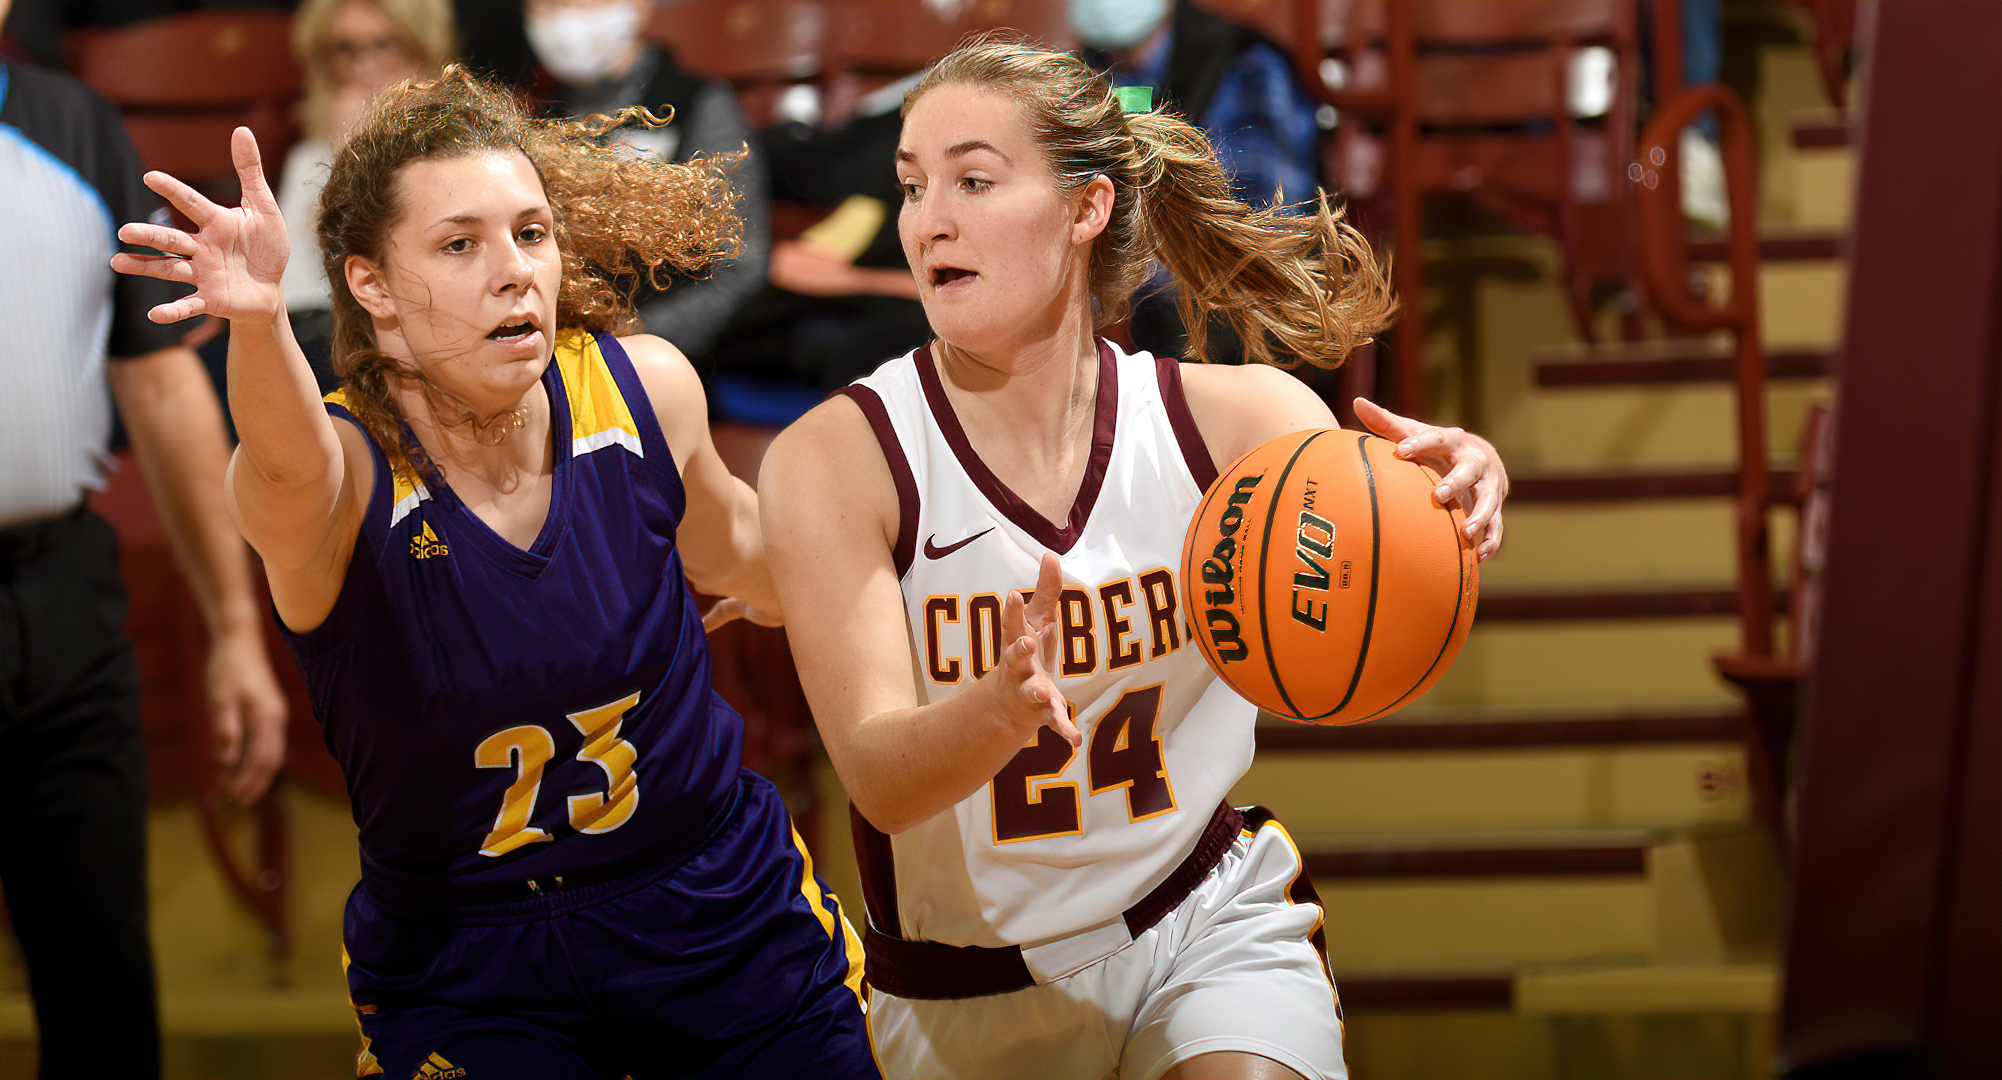 Jordyn Kahler scored all four of the Cobbers' points in OT at Hamline. She went 4-for-5 from the floor and finished with a career-high 12 points.